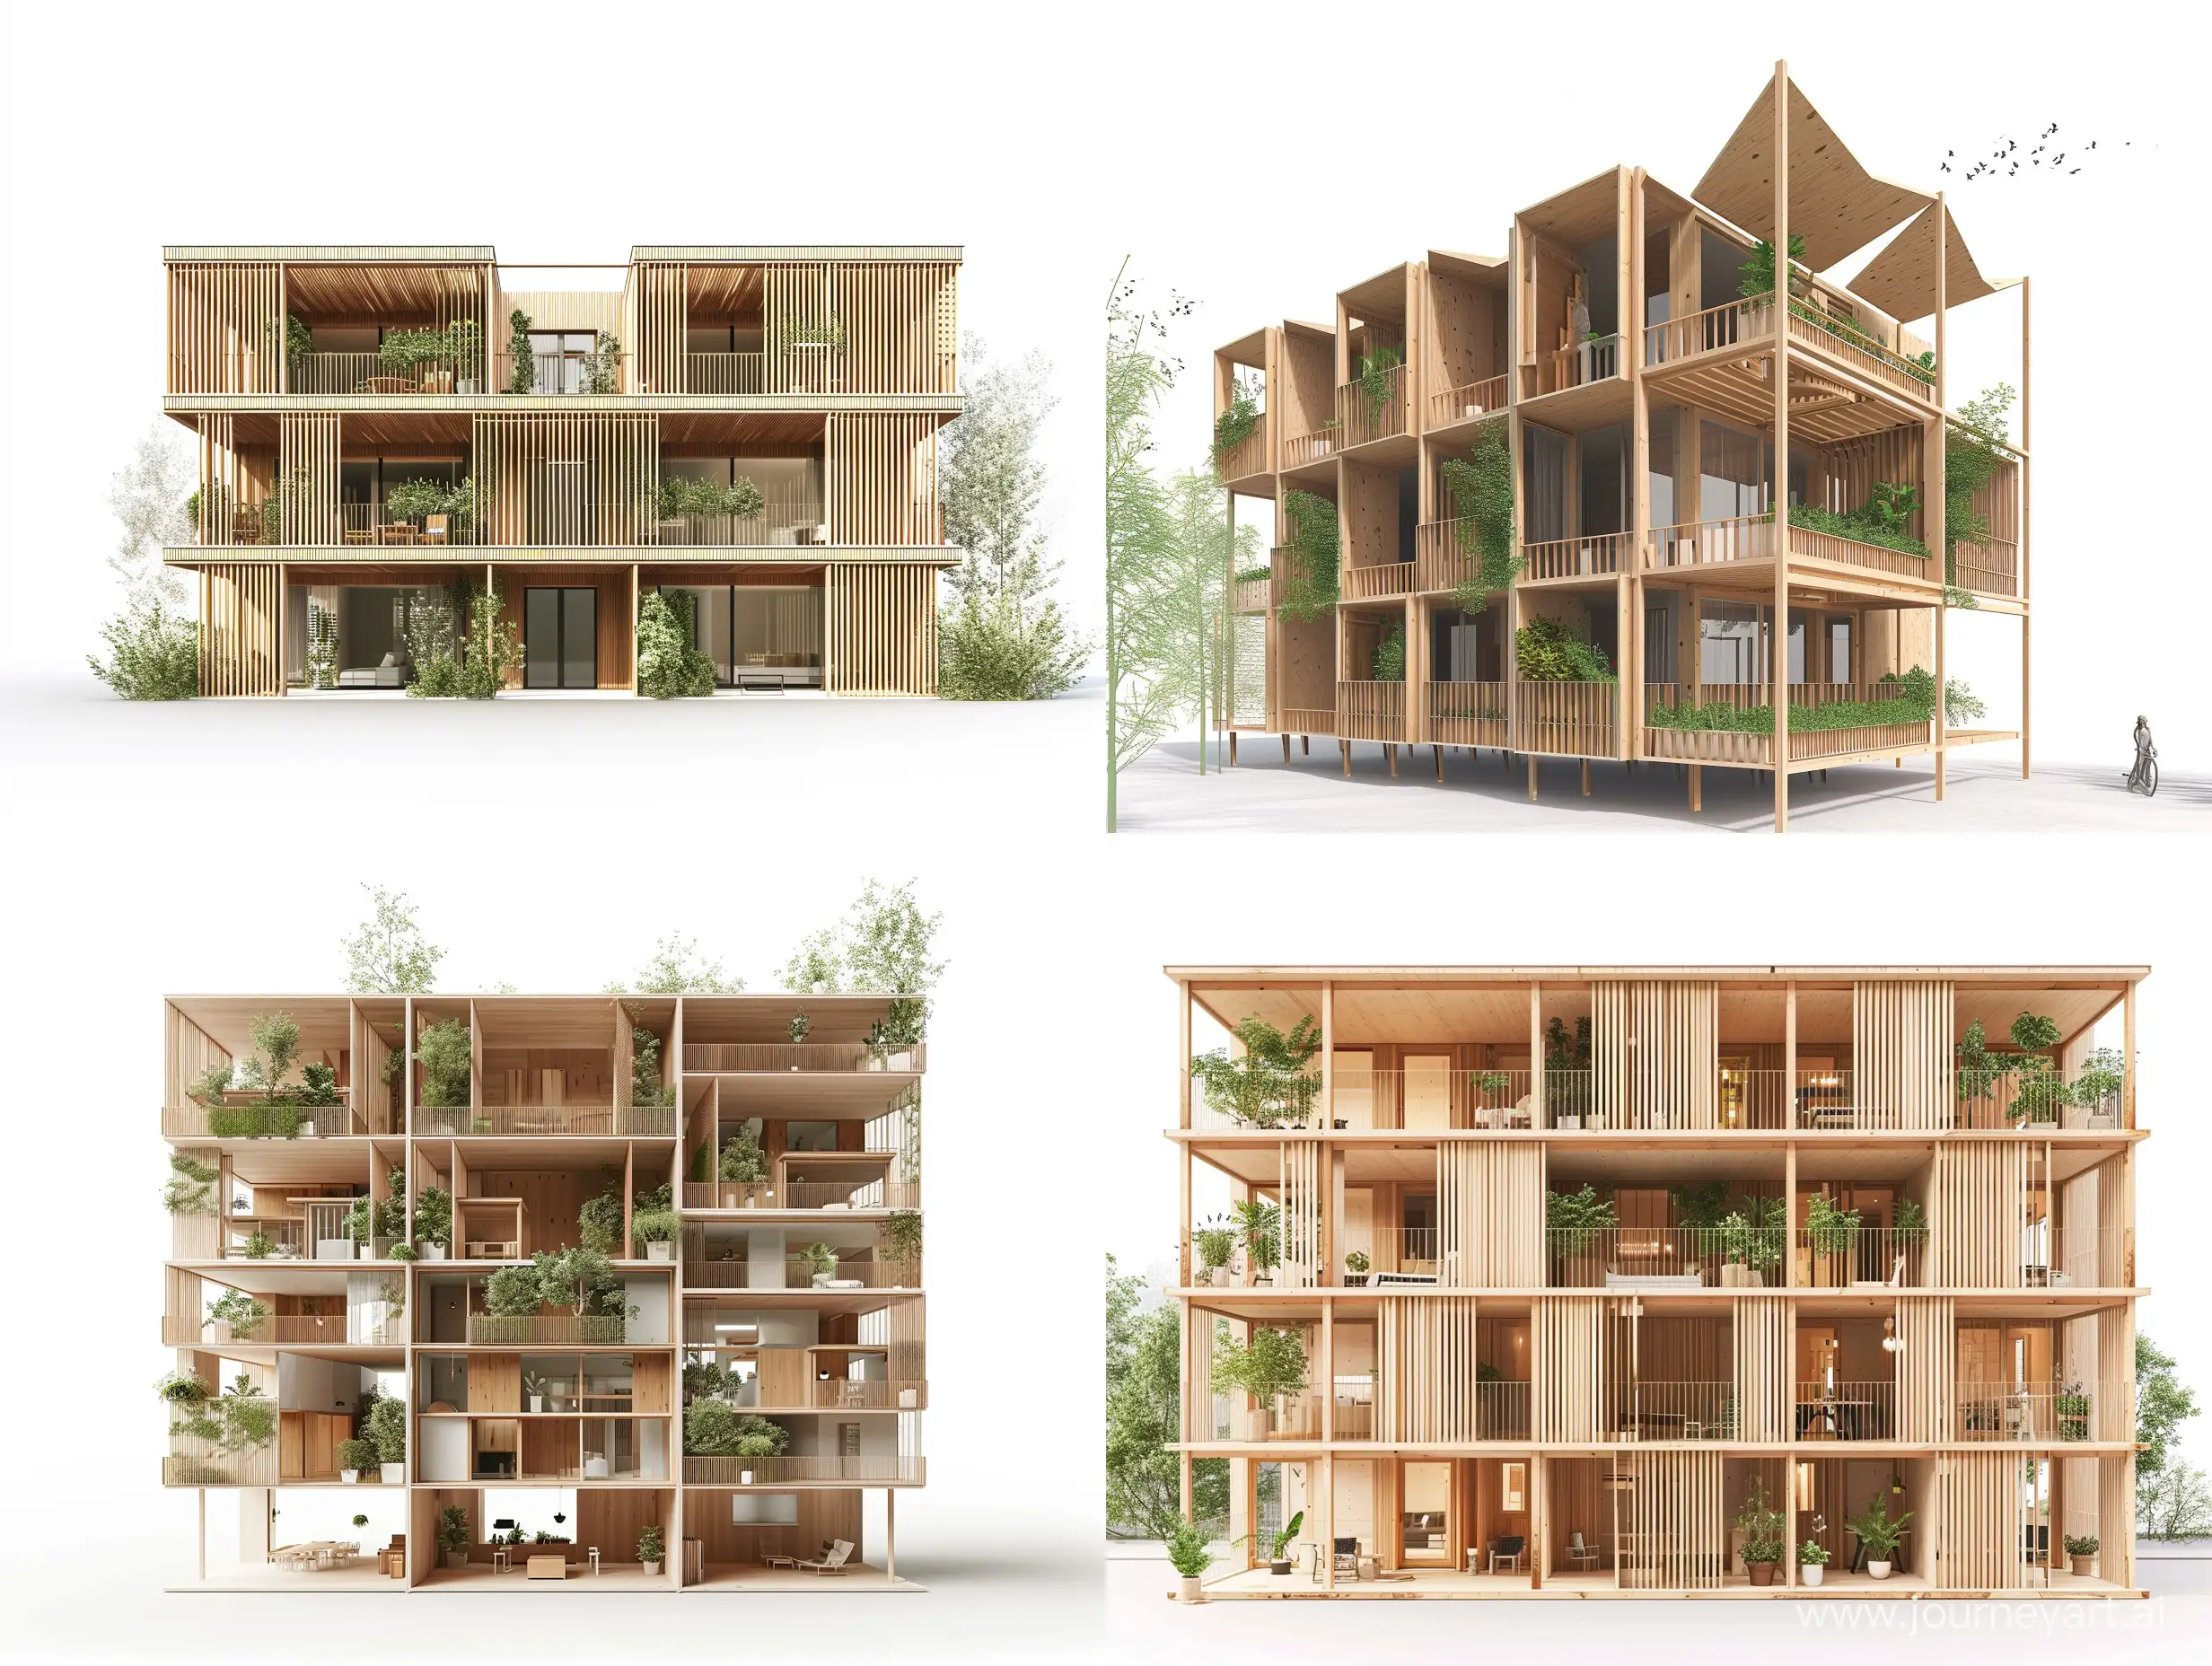 3D sketch of a 3 storeys height building, built with timber modules. Facade with loggias spanning half the length of each module. Incorporate plants into the design. Ensure that the building includes apartments on both levels and has a double-inclined roof.